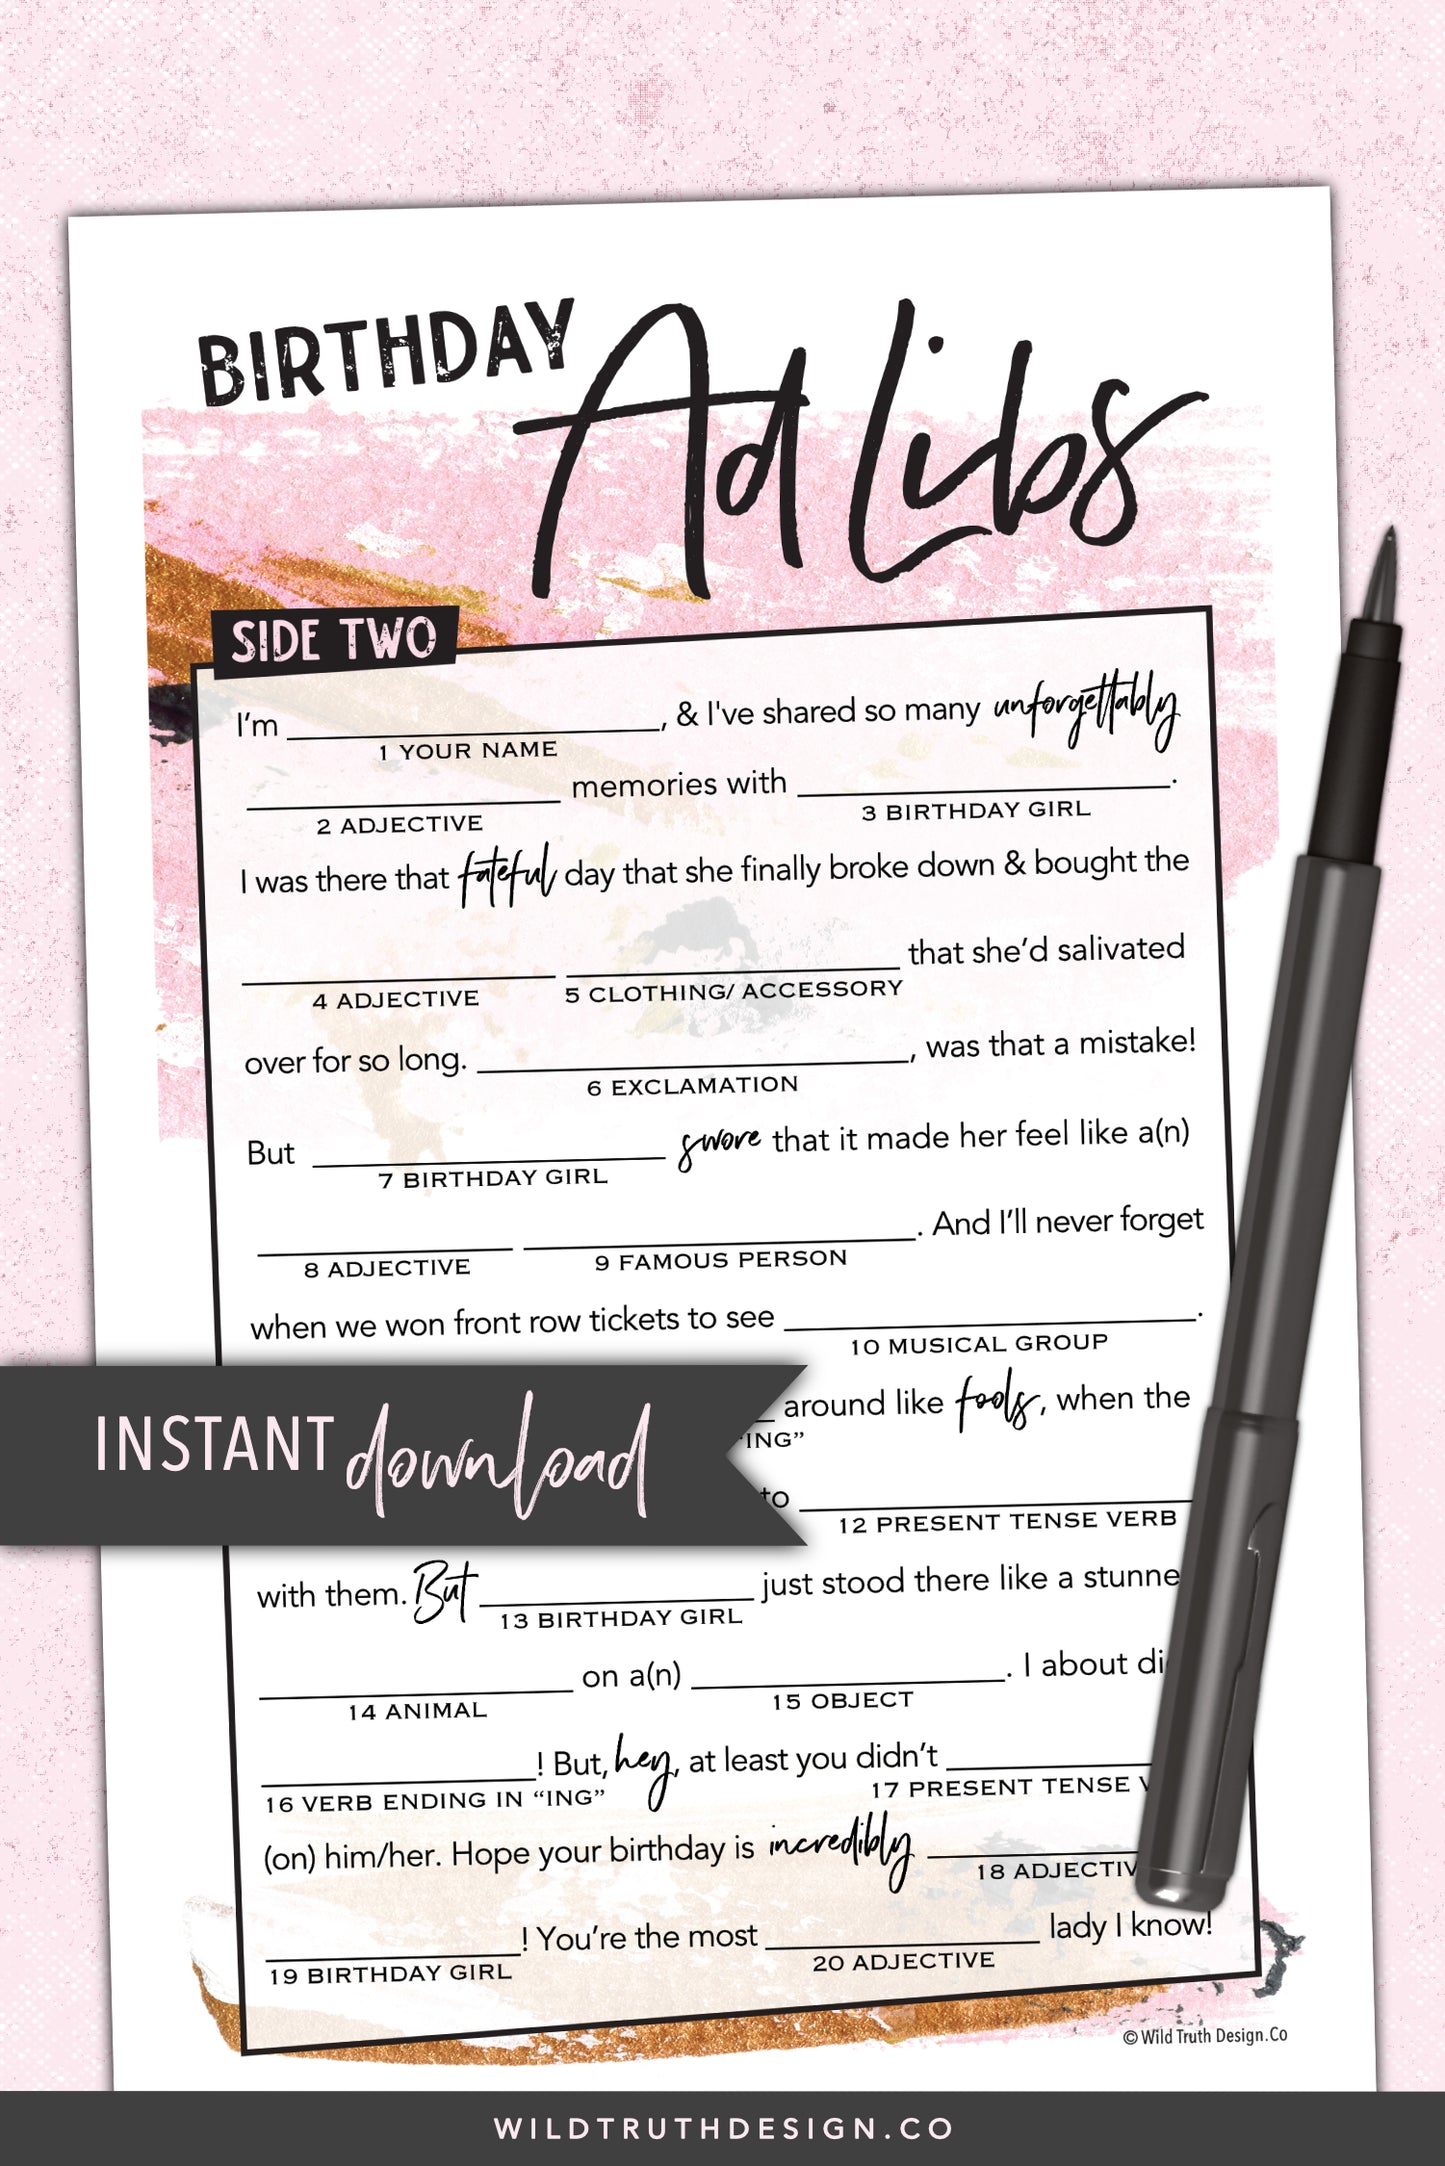 Birthday Mad Libs For Women - Printable Games